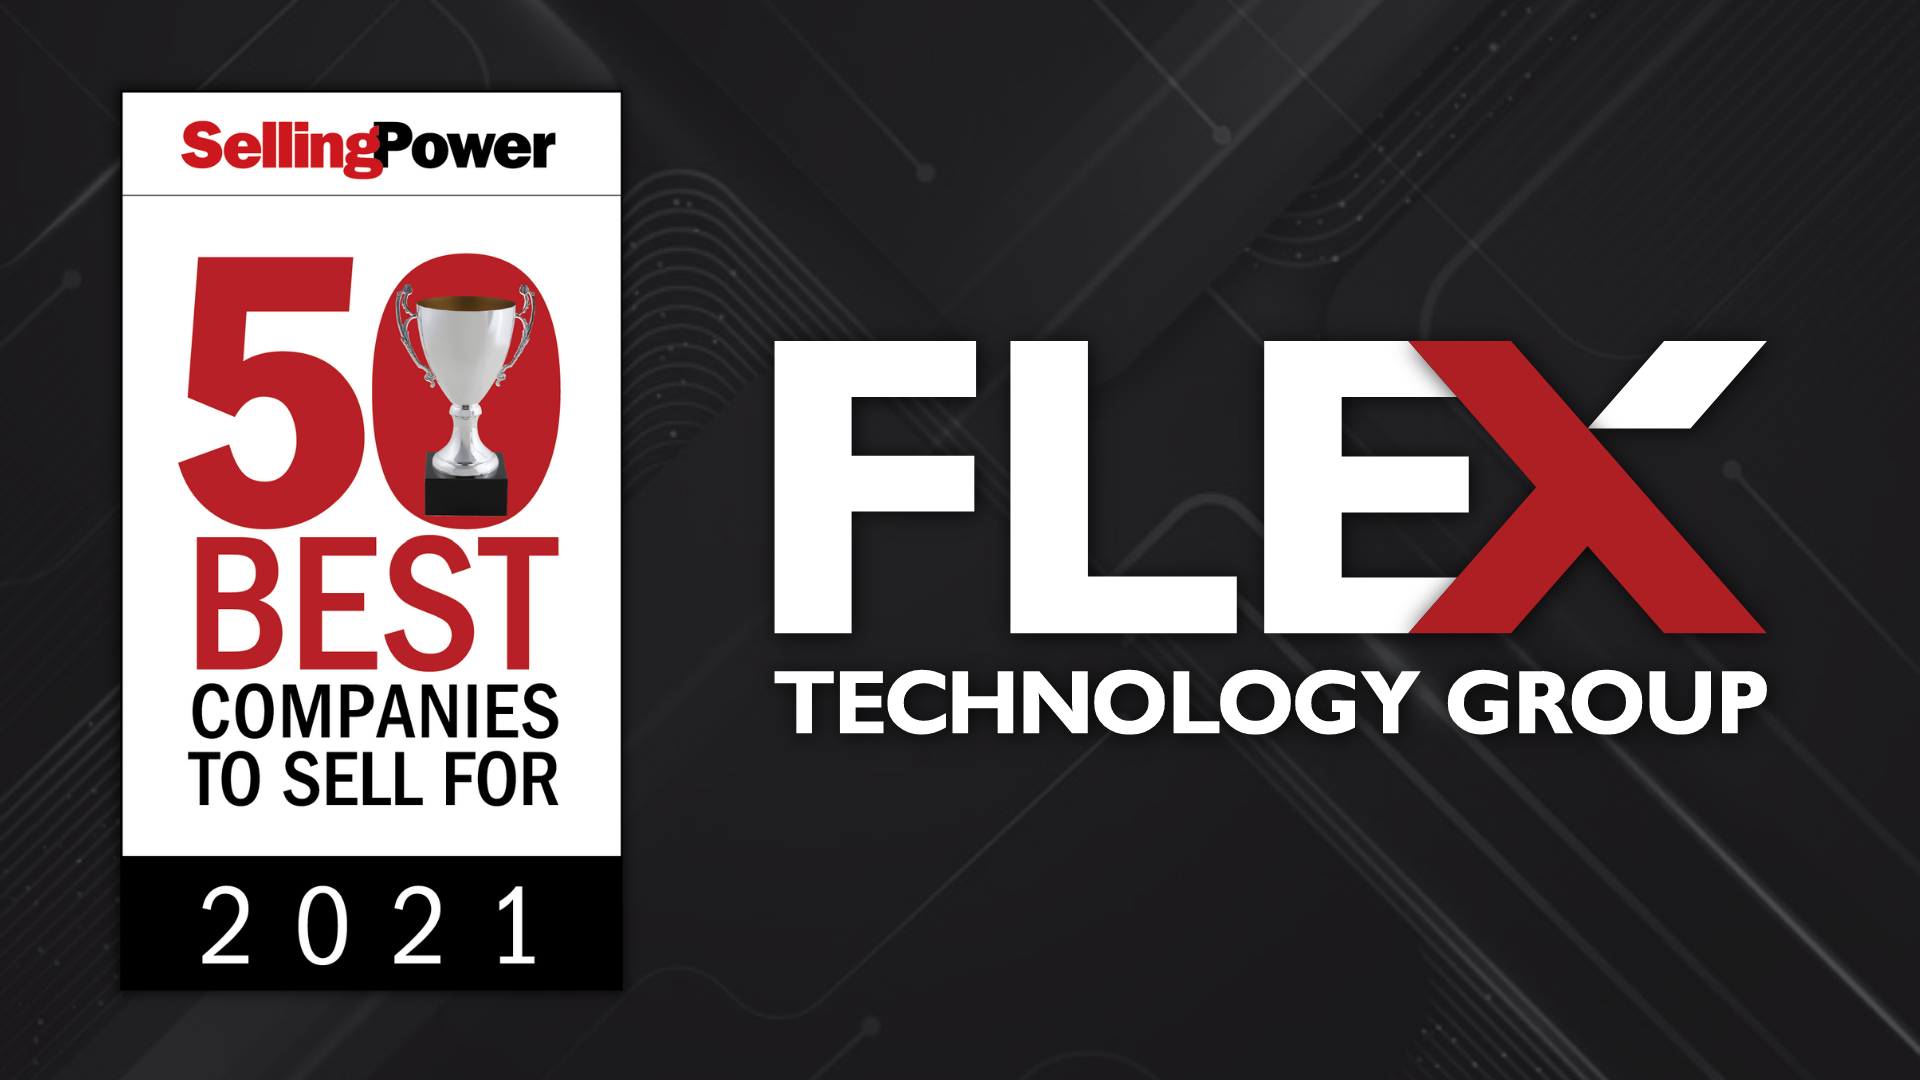 Flex Technology Group Recognized on Selling Power’s “50 Best Companies to Sell For” List in 2021